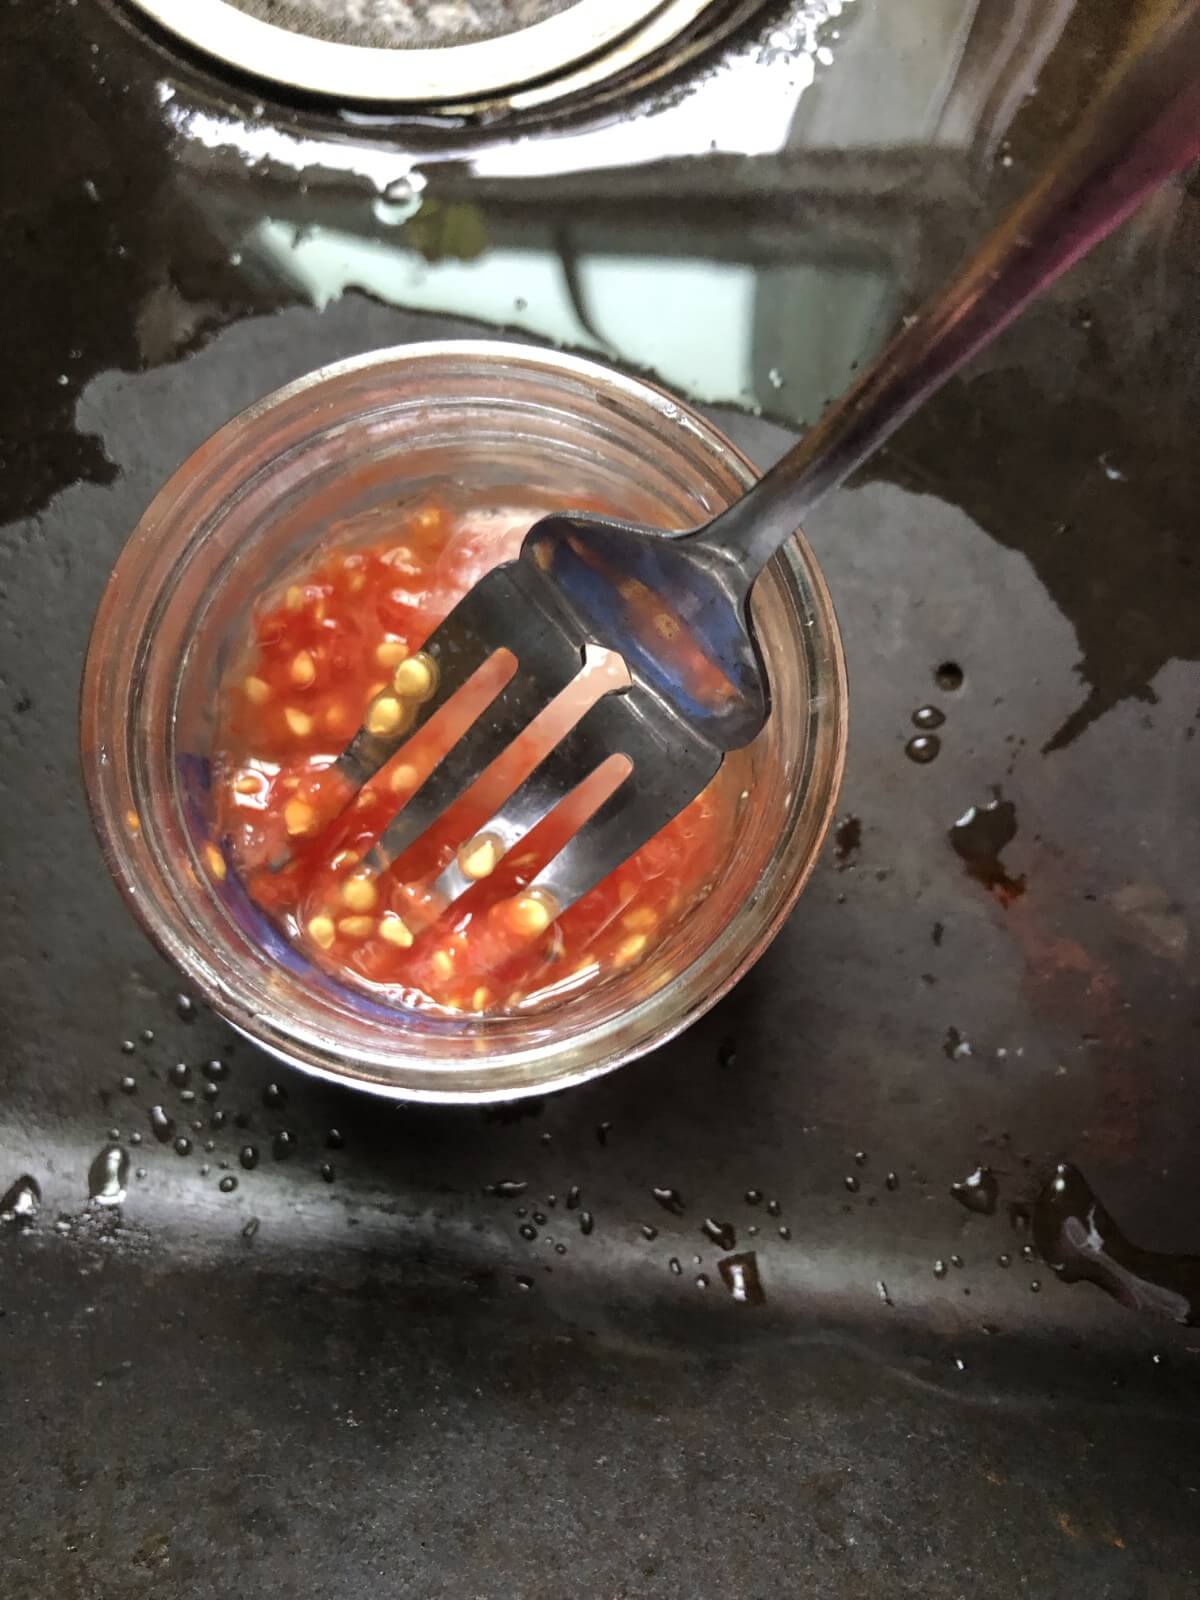 tomato seeds on a fork with gel covering